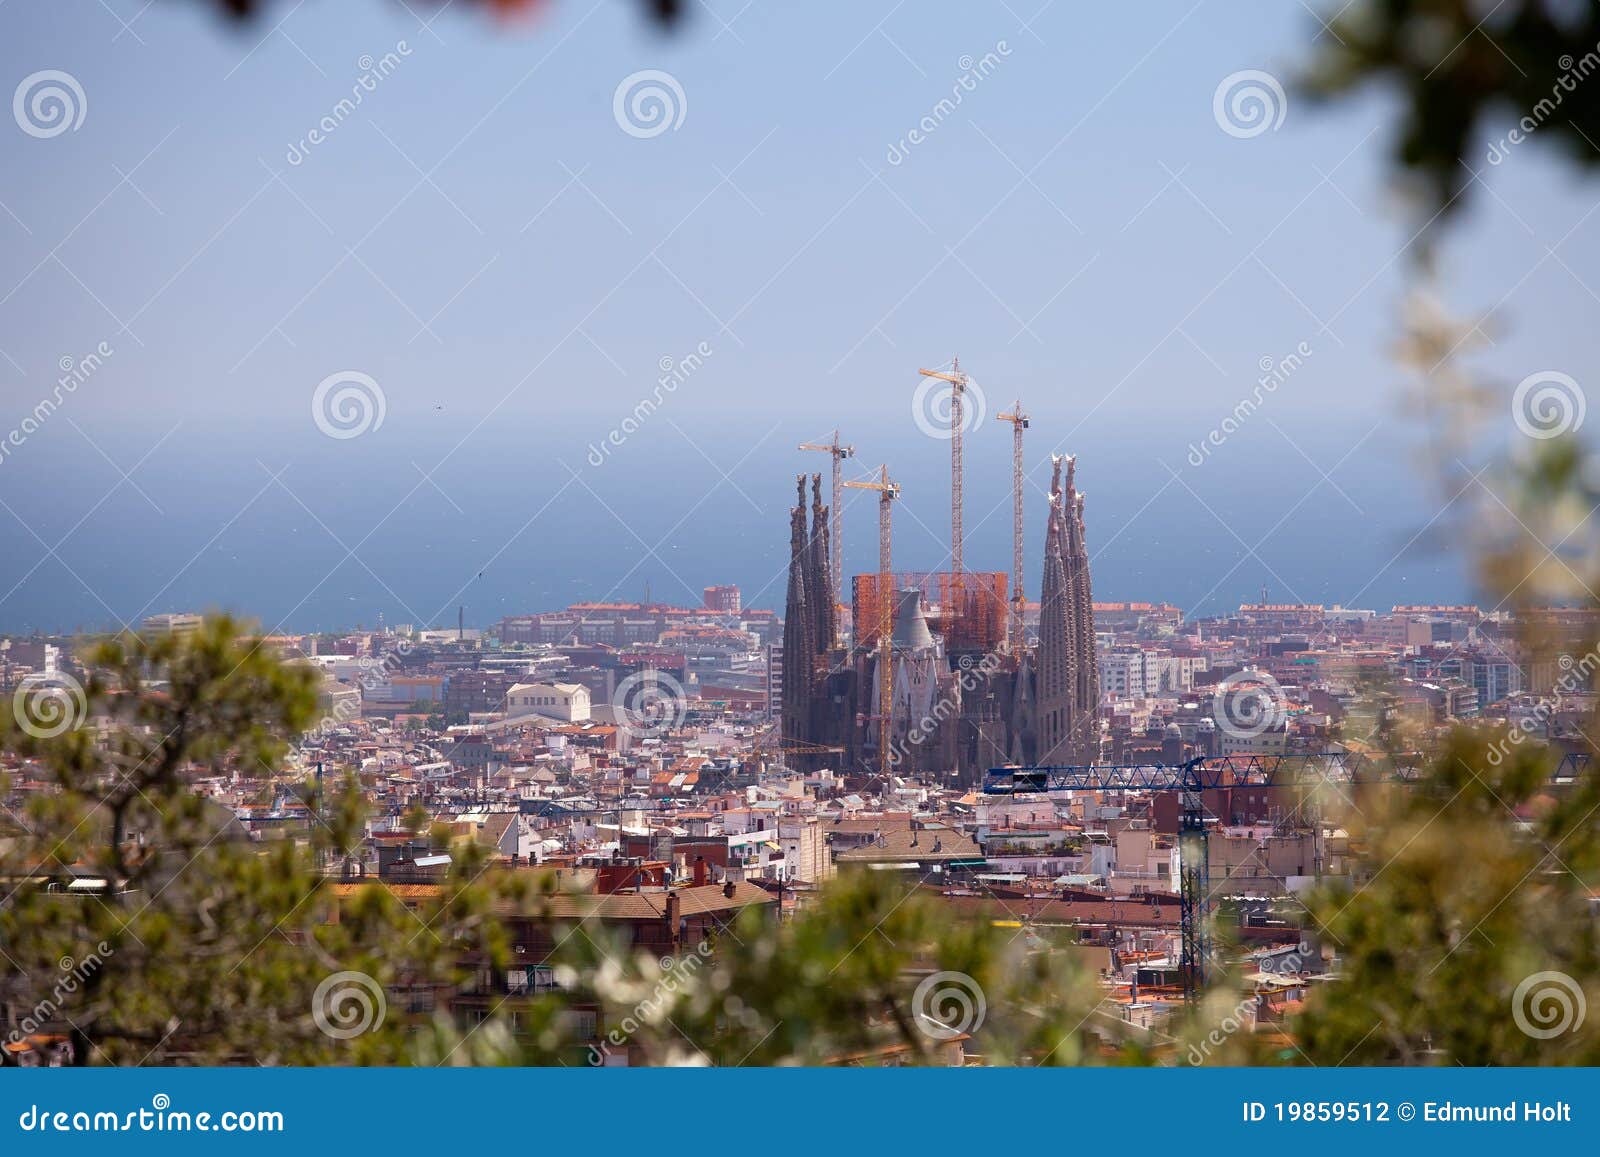 sagrada familia viewed from parc guell